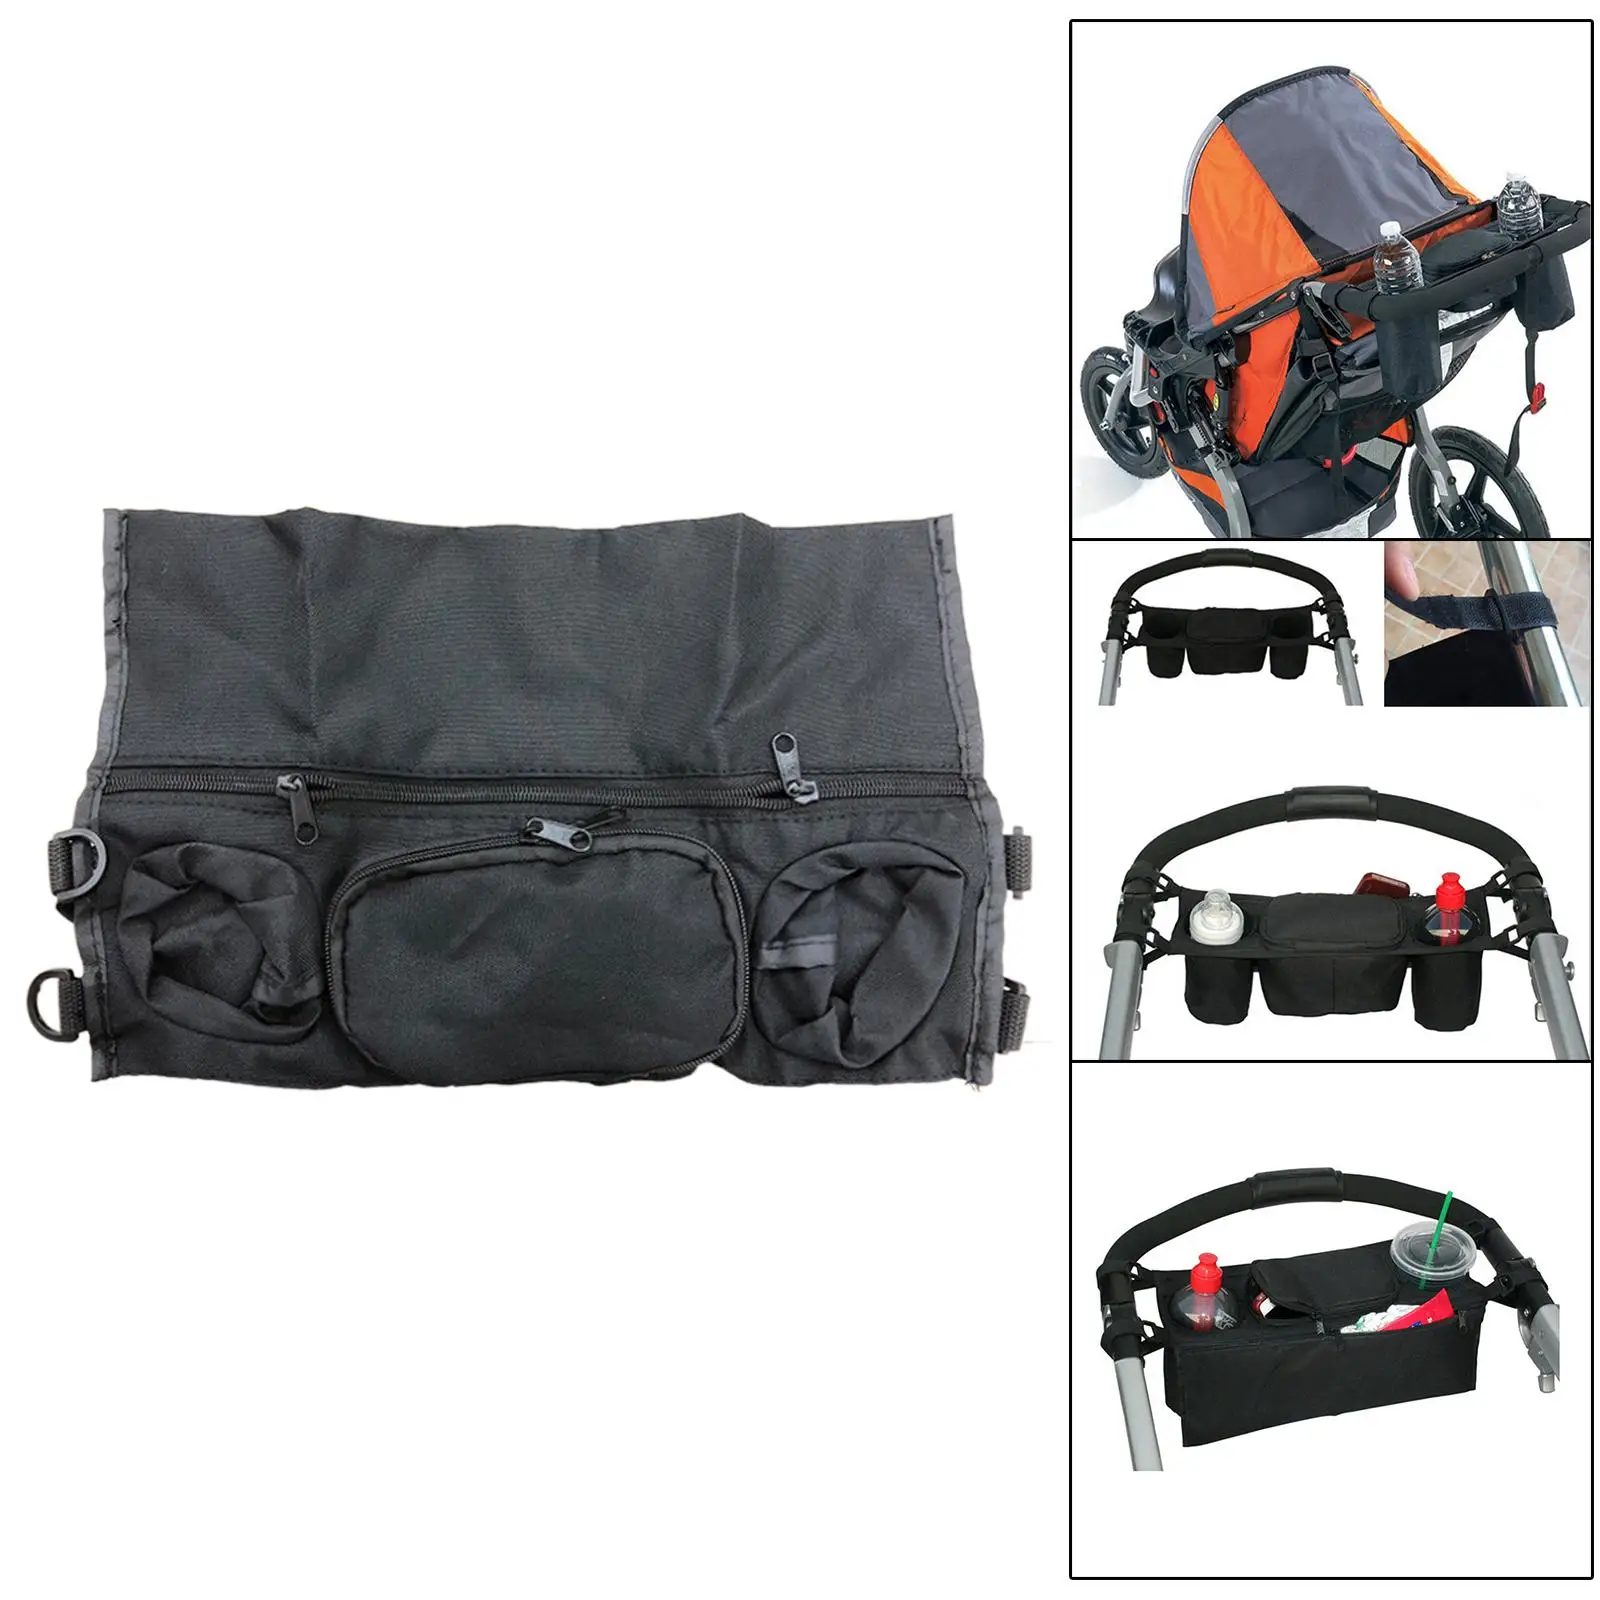 Stroller Organizer Bag Multifunction Large Space Multiple Zipper Pockets with Zipper Nursery Storage bags easy Installation